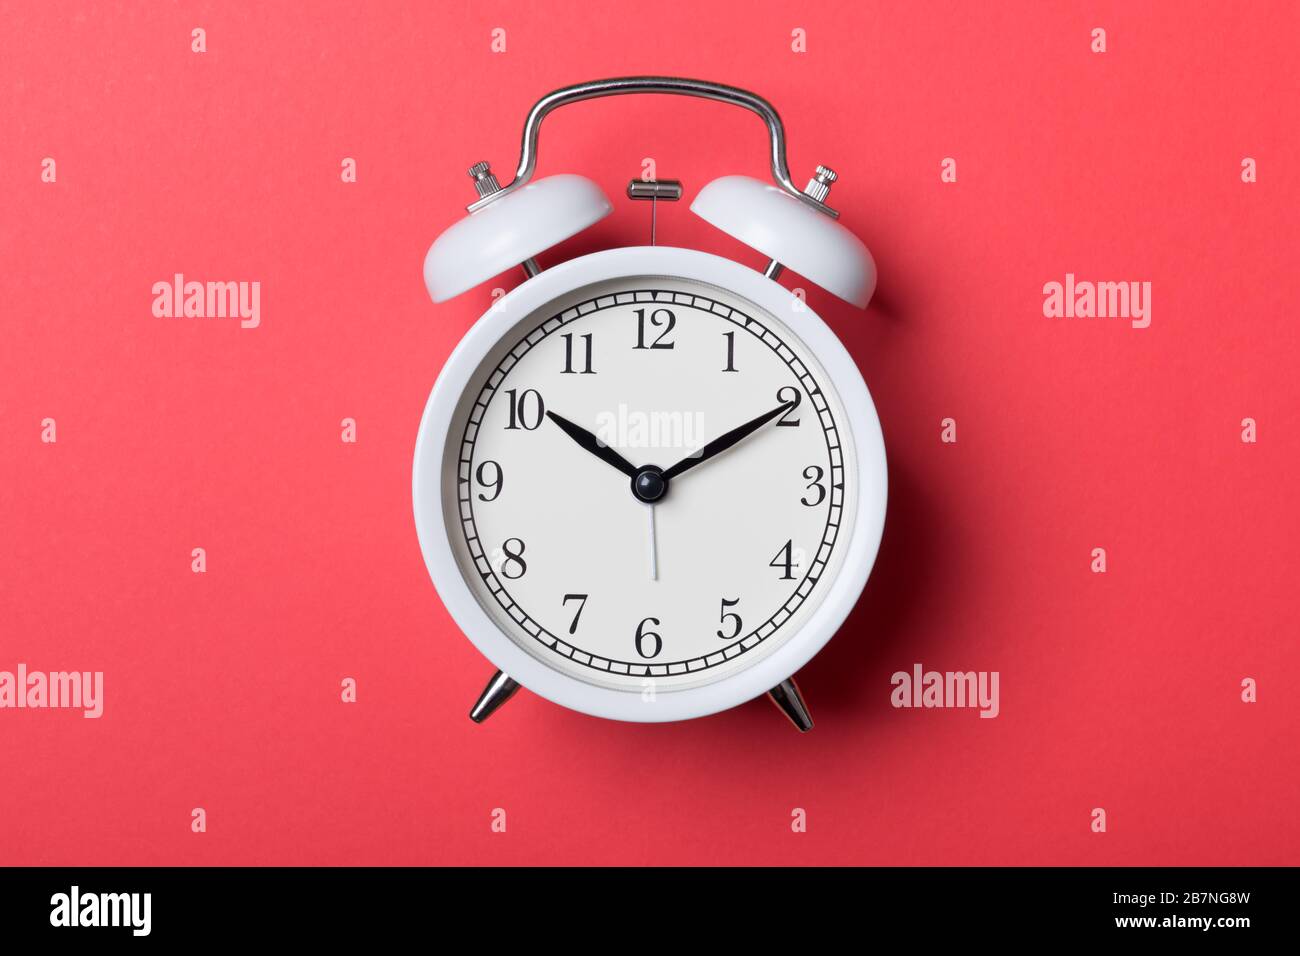 White vintage alarm clock on red background. Time concept Stock Photo